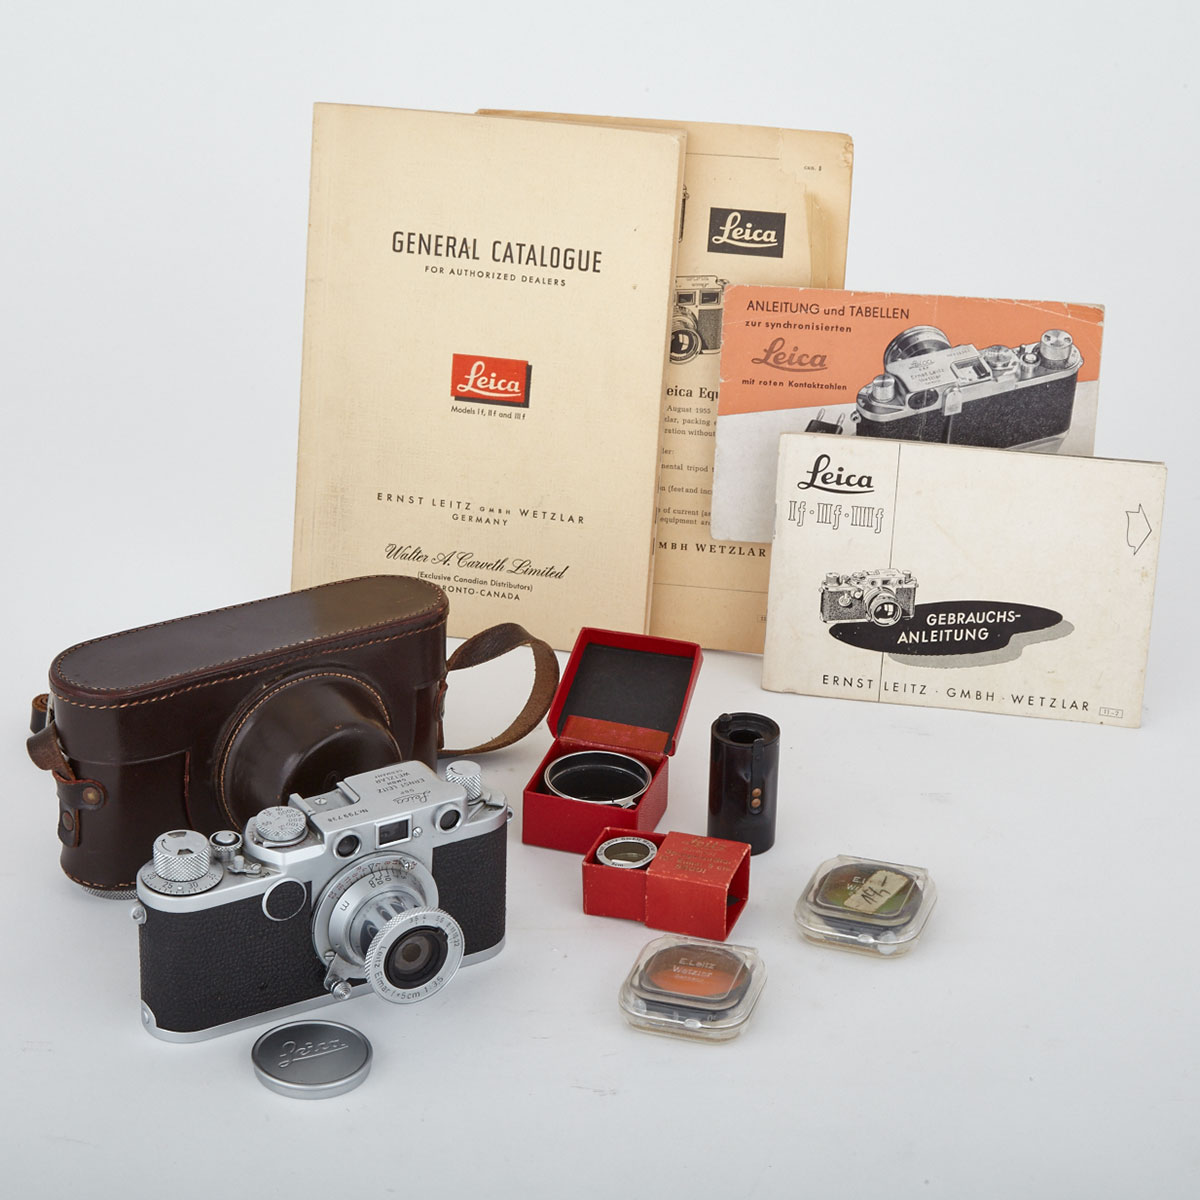 Leica IIf RD Rangefinder Camera and Accessories, 1956